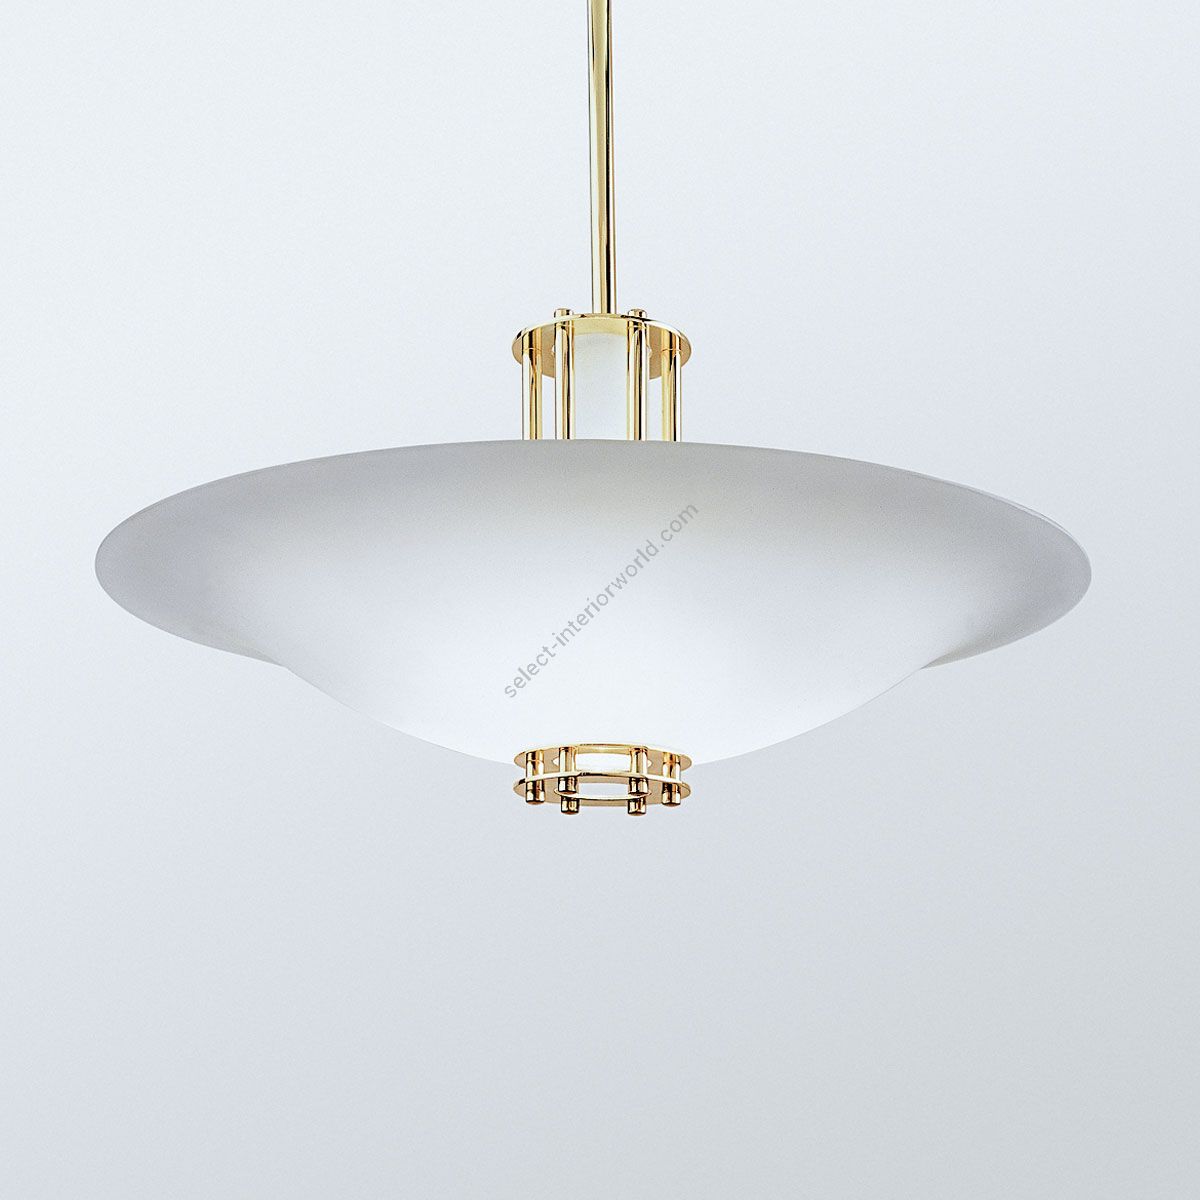 Orion Pendant 9841, 9842 by Boyd Lighting